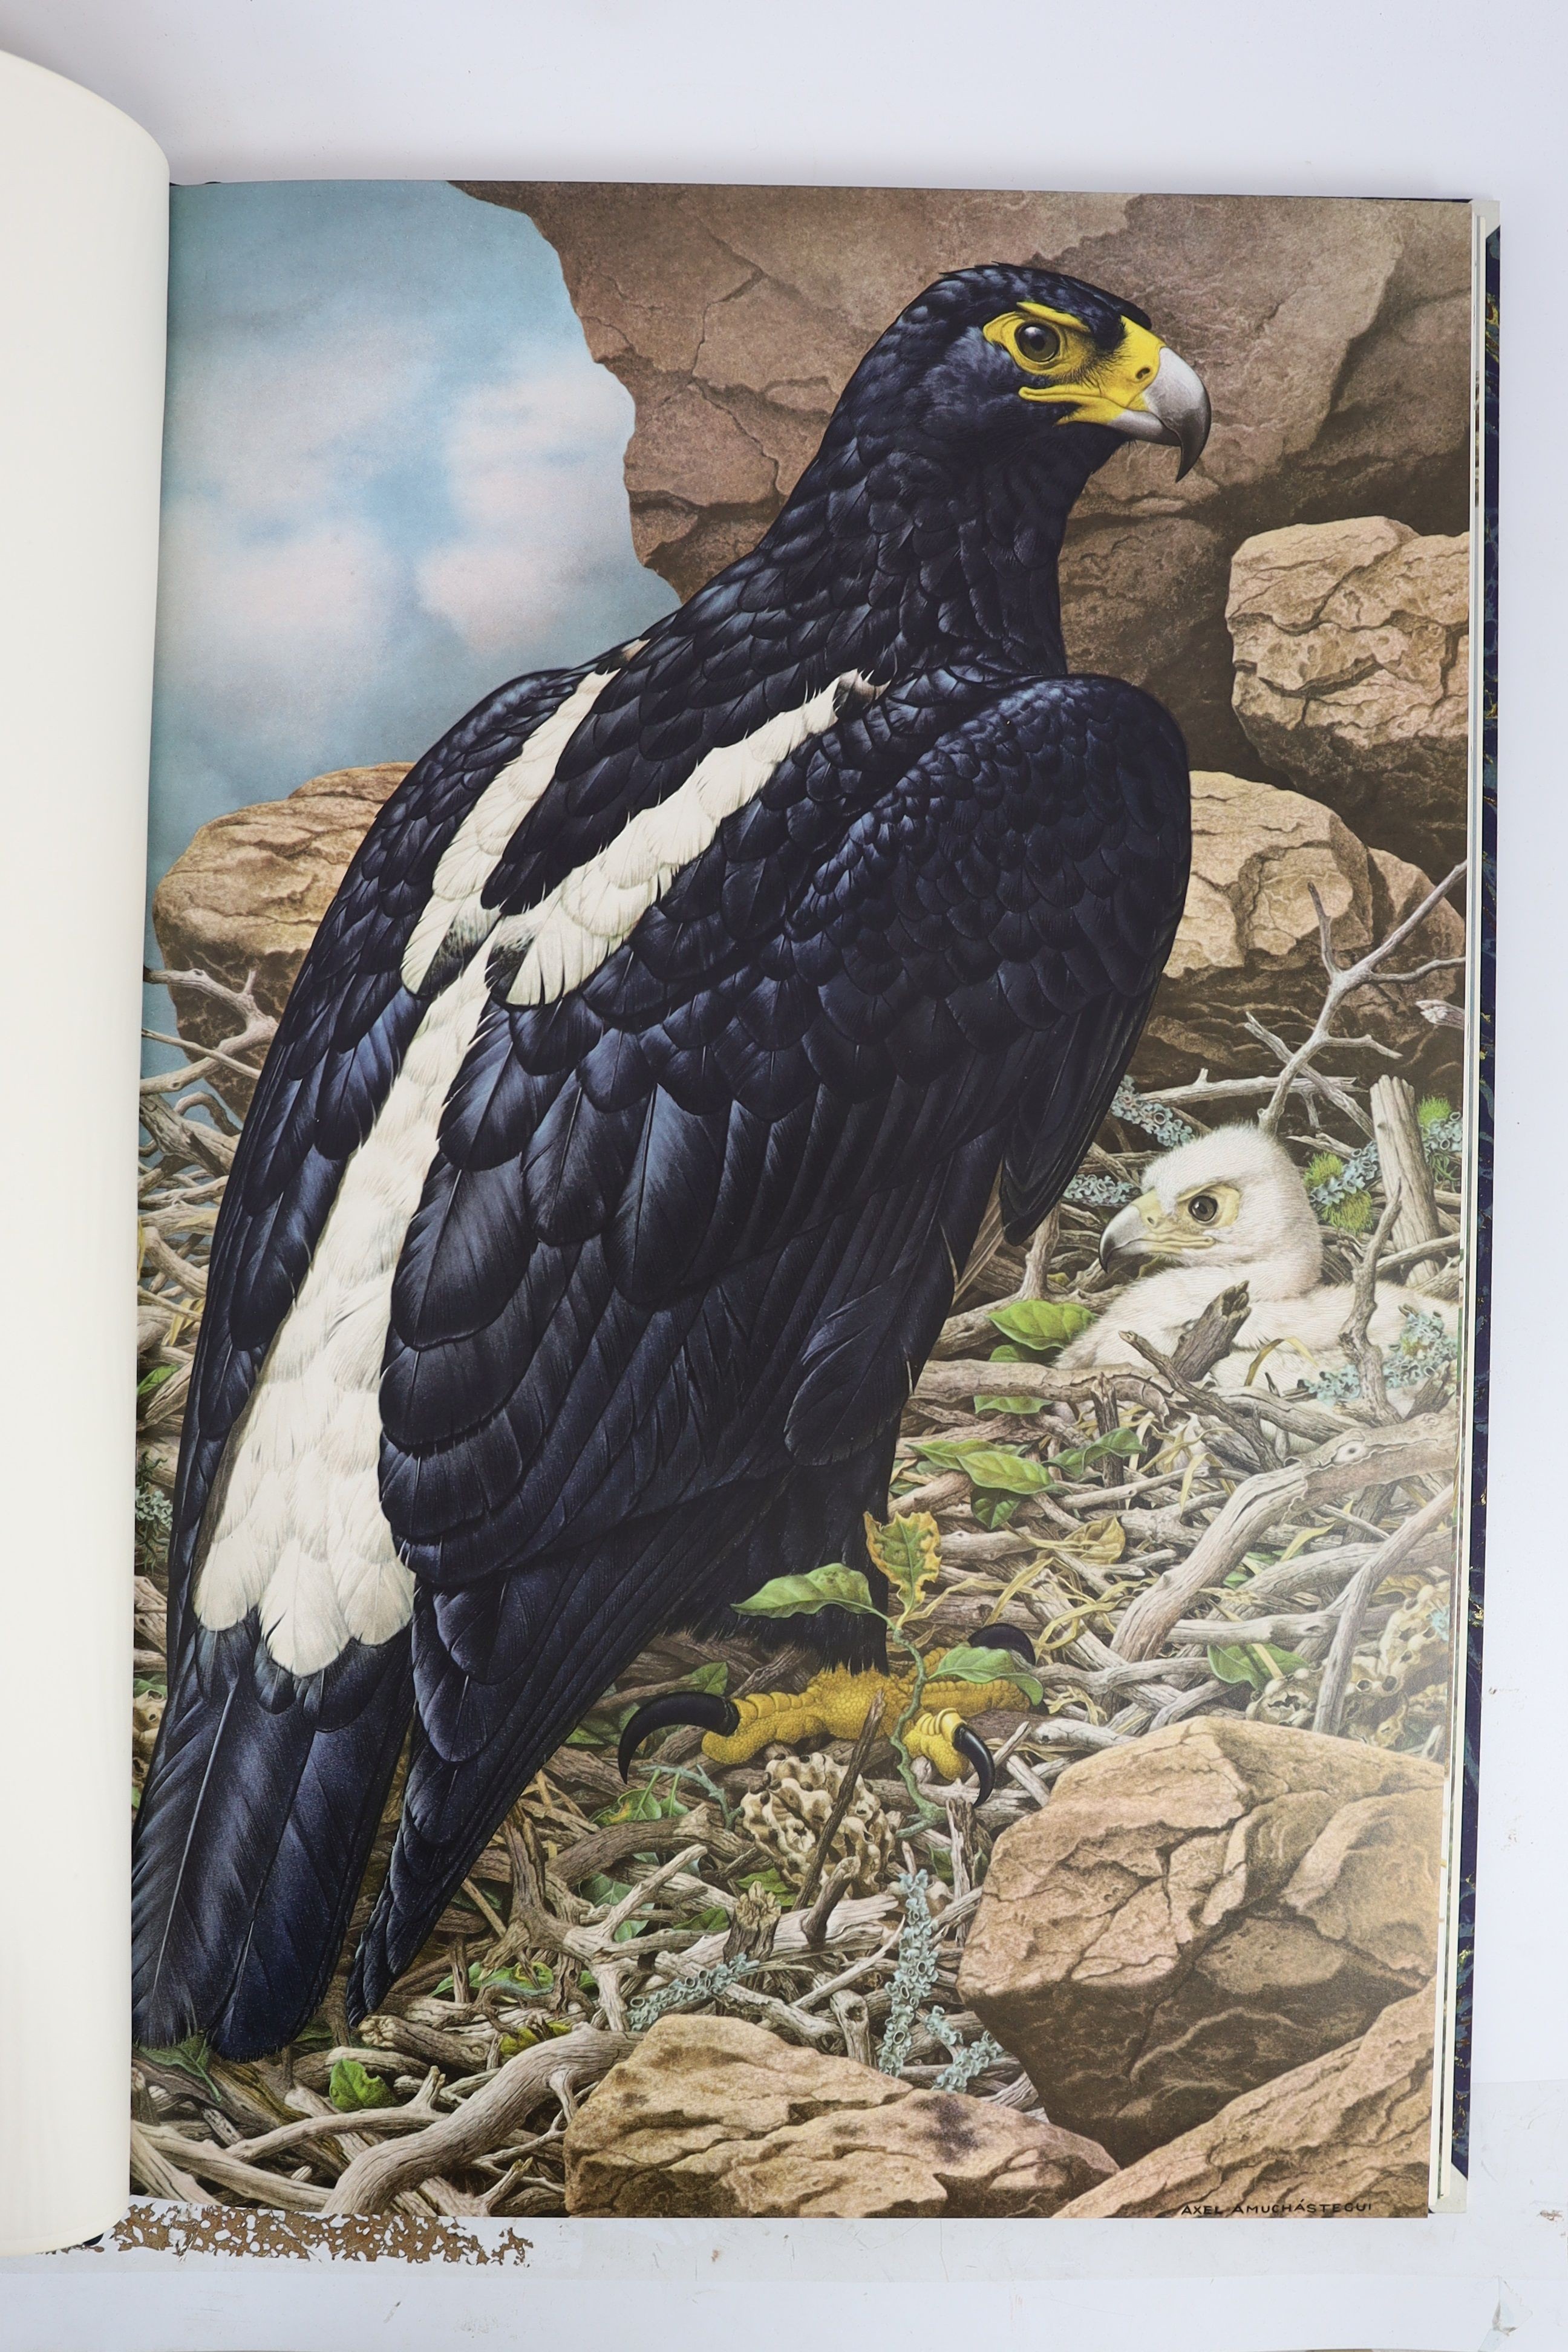 Amuchastegui, Axel - Some Birds and Mamals of Africa, one of 505 signed copies, folio, quarter morocco, illustrated with 14 colour plates by the author, Tryon Gallery, London, 1979, in slip case.